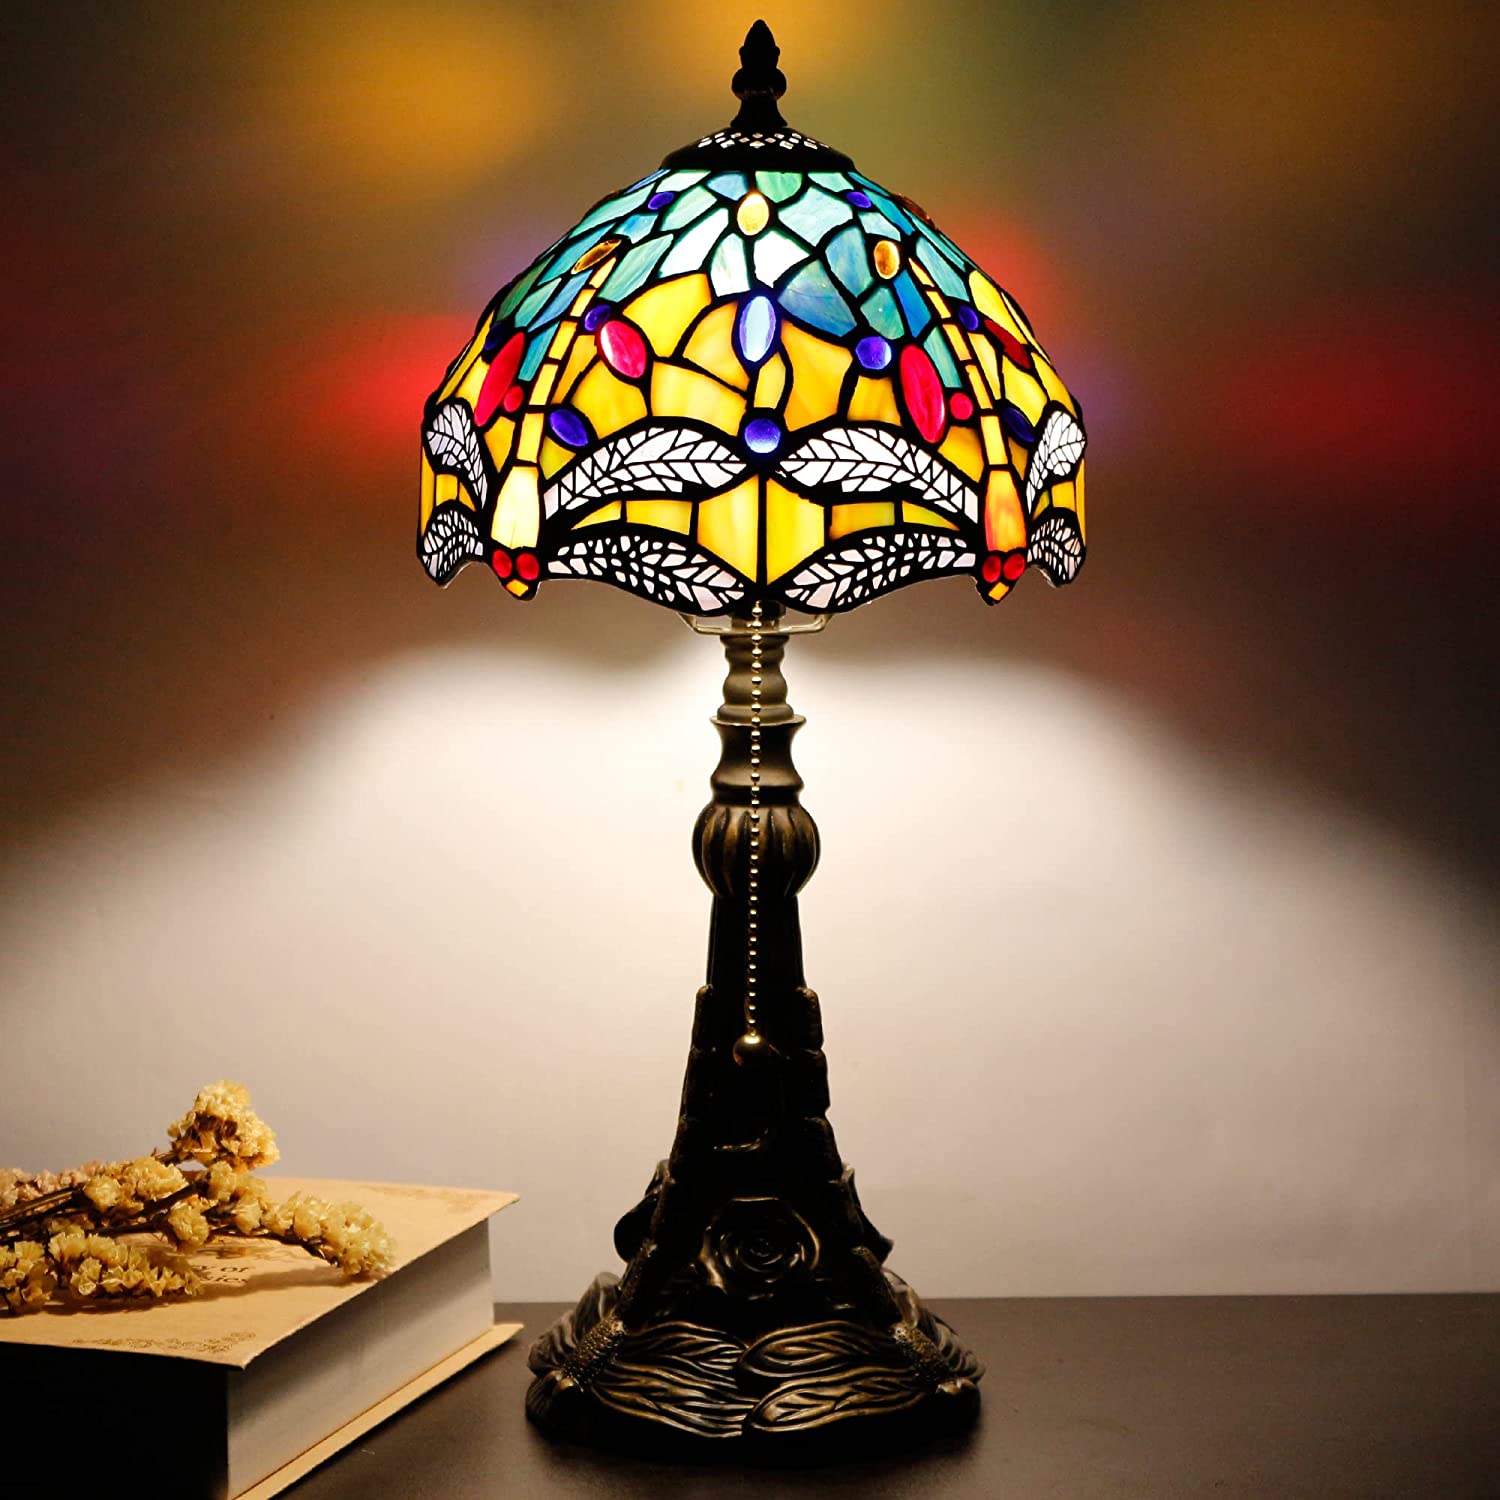 How To Tell If It's A Tiffany Lamp